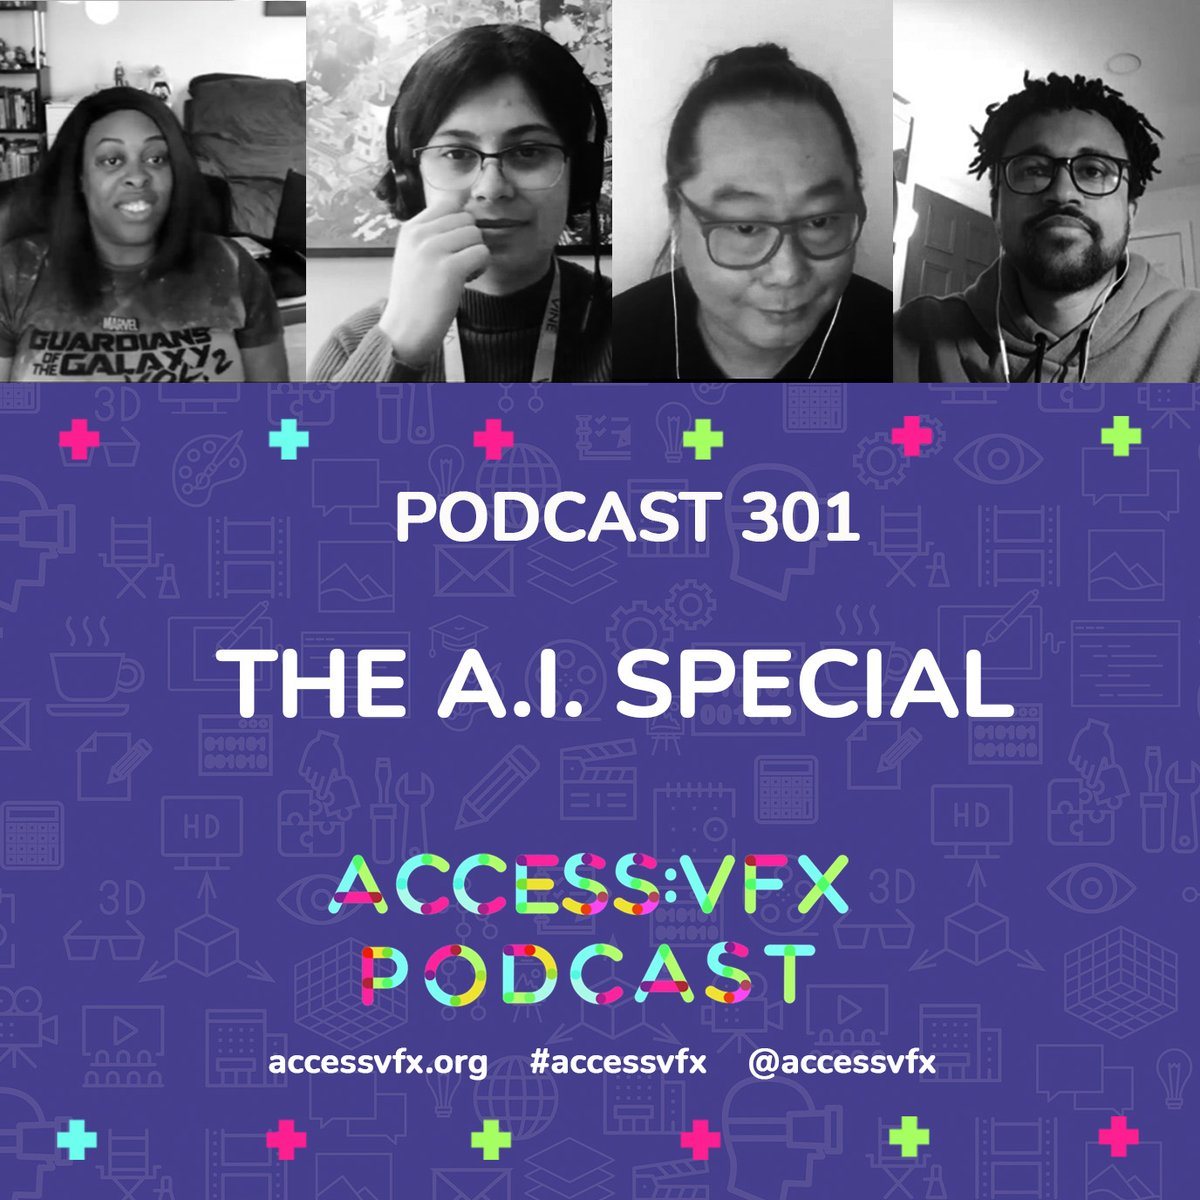 Have you checked out the new season of the @accessvfx podcast with @nerdette3point2 and a stellar industry panel discussing all things #artificialIntelligence yet? 🤖 Spotify: open.spotify.com/episode/01OZcb… Apple: podcasts.apple.com/us/podcast/301… Soundcloud: soundcloud.com/accessvfx/301-… #accessvfx